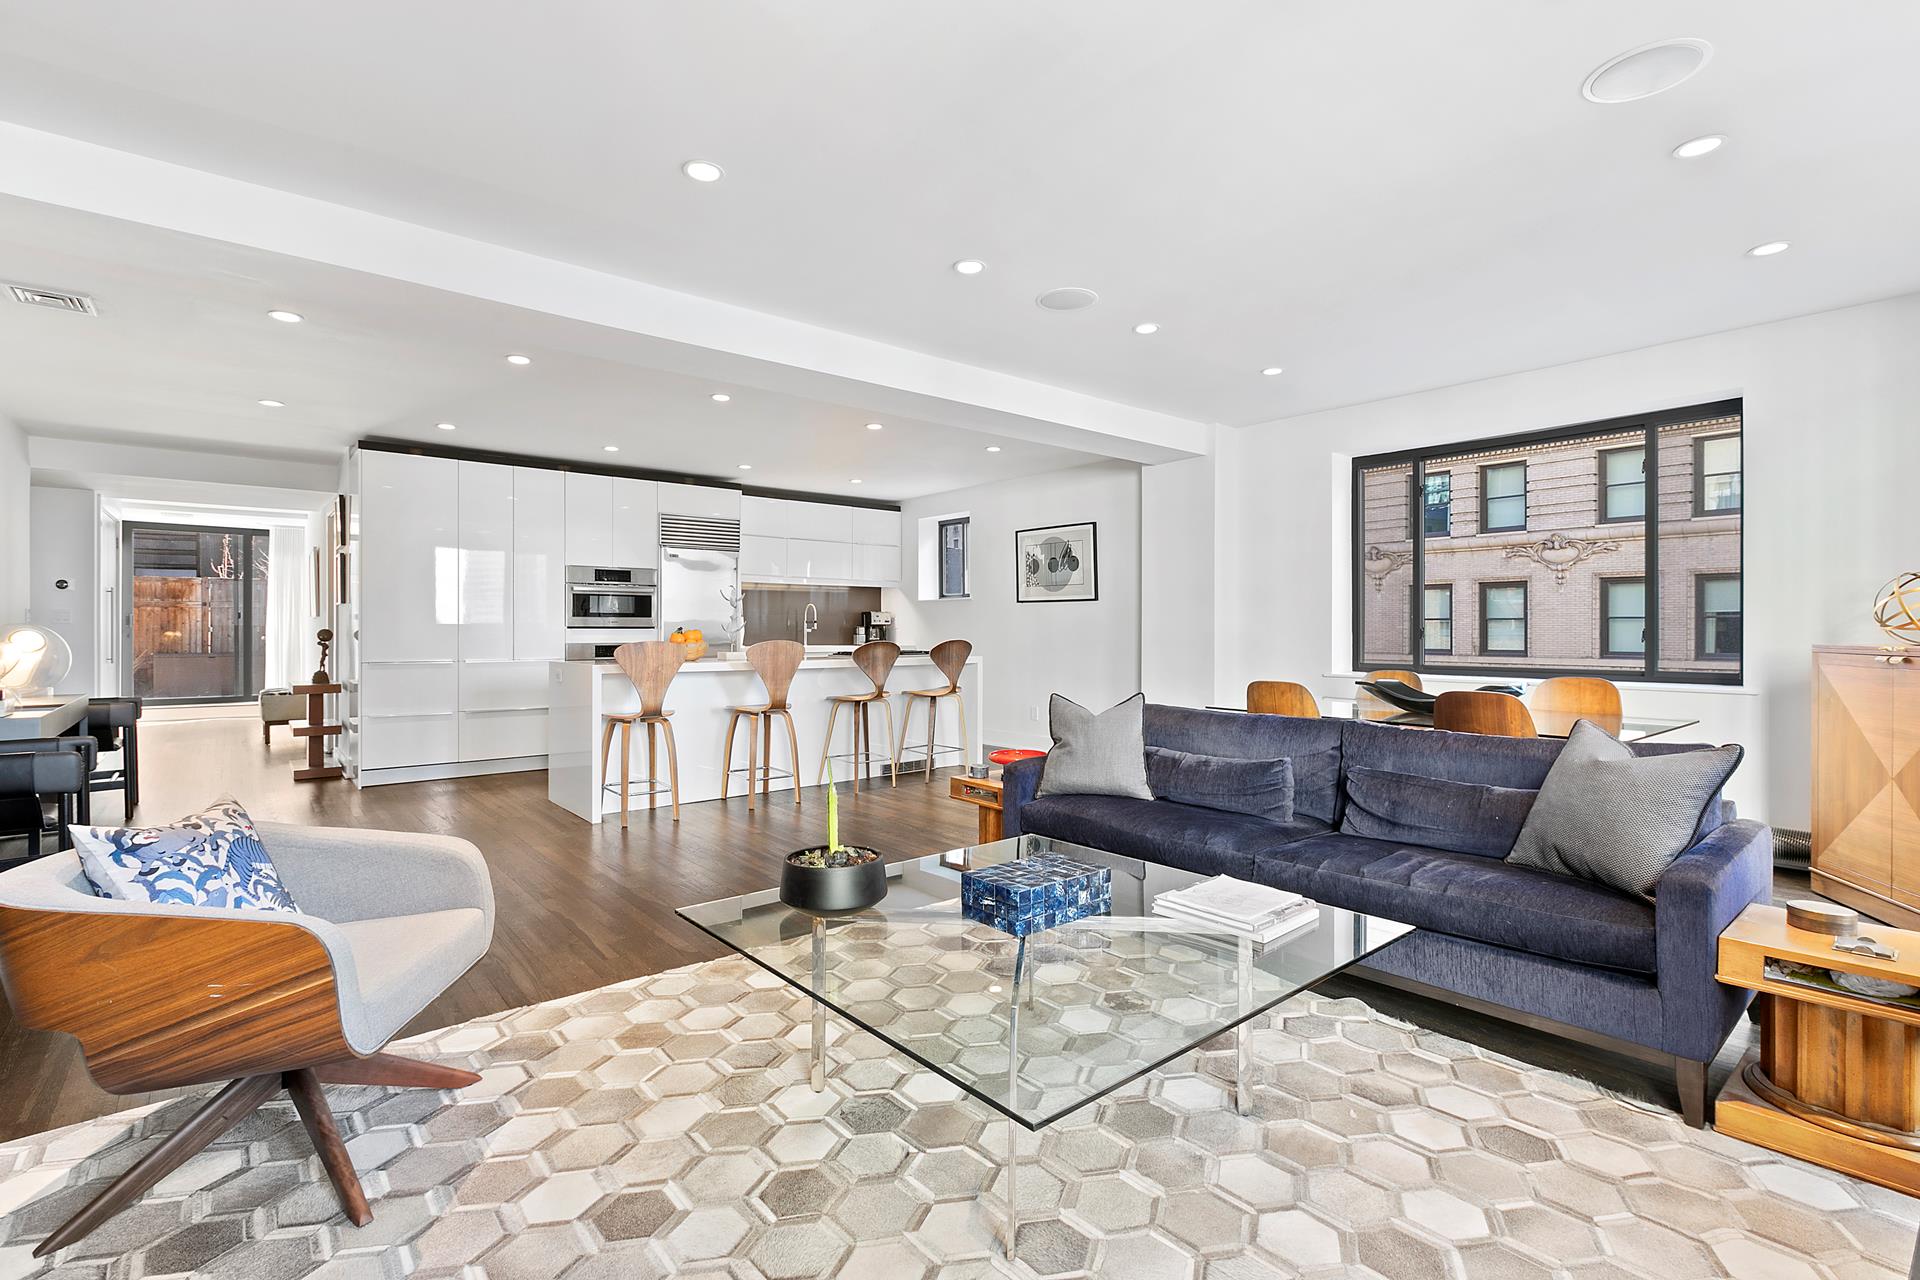 176 Broadway Phc, Financial District, Downtown, NYC - 3 Bedrooms  
2 Bathrooms  
5 Rooms - 